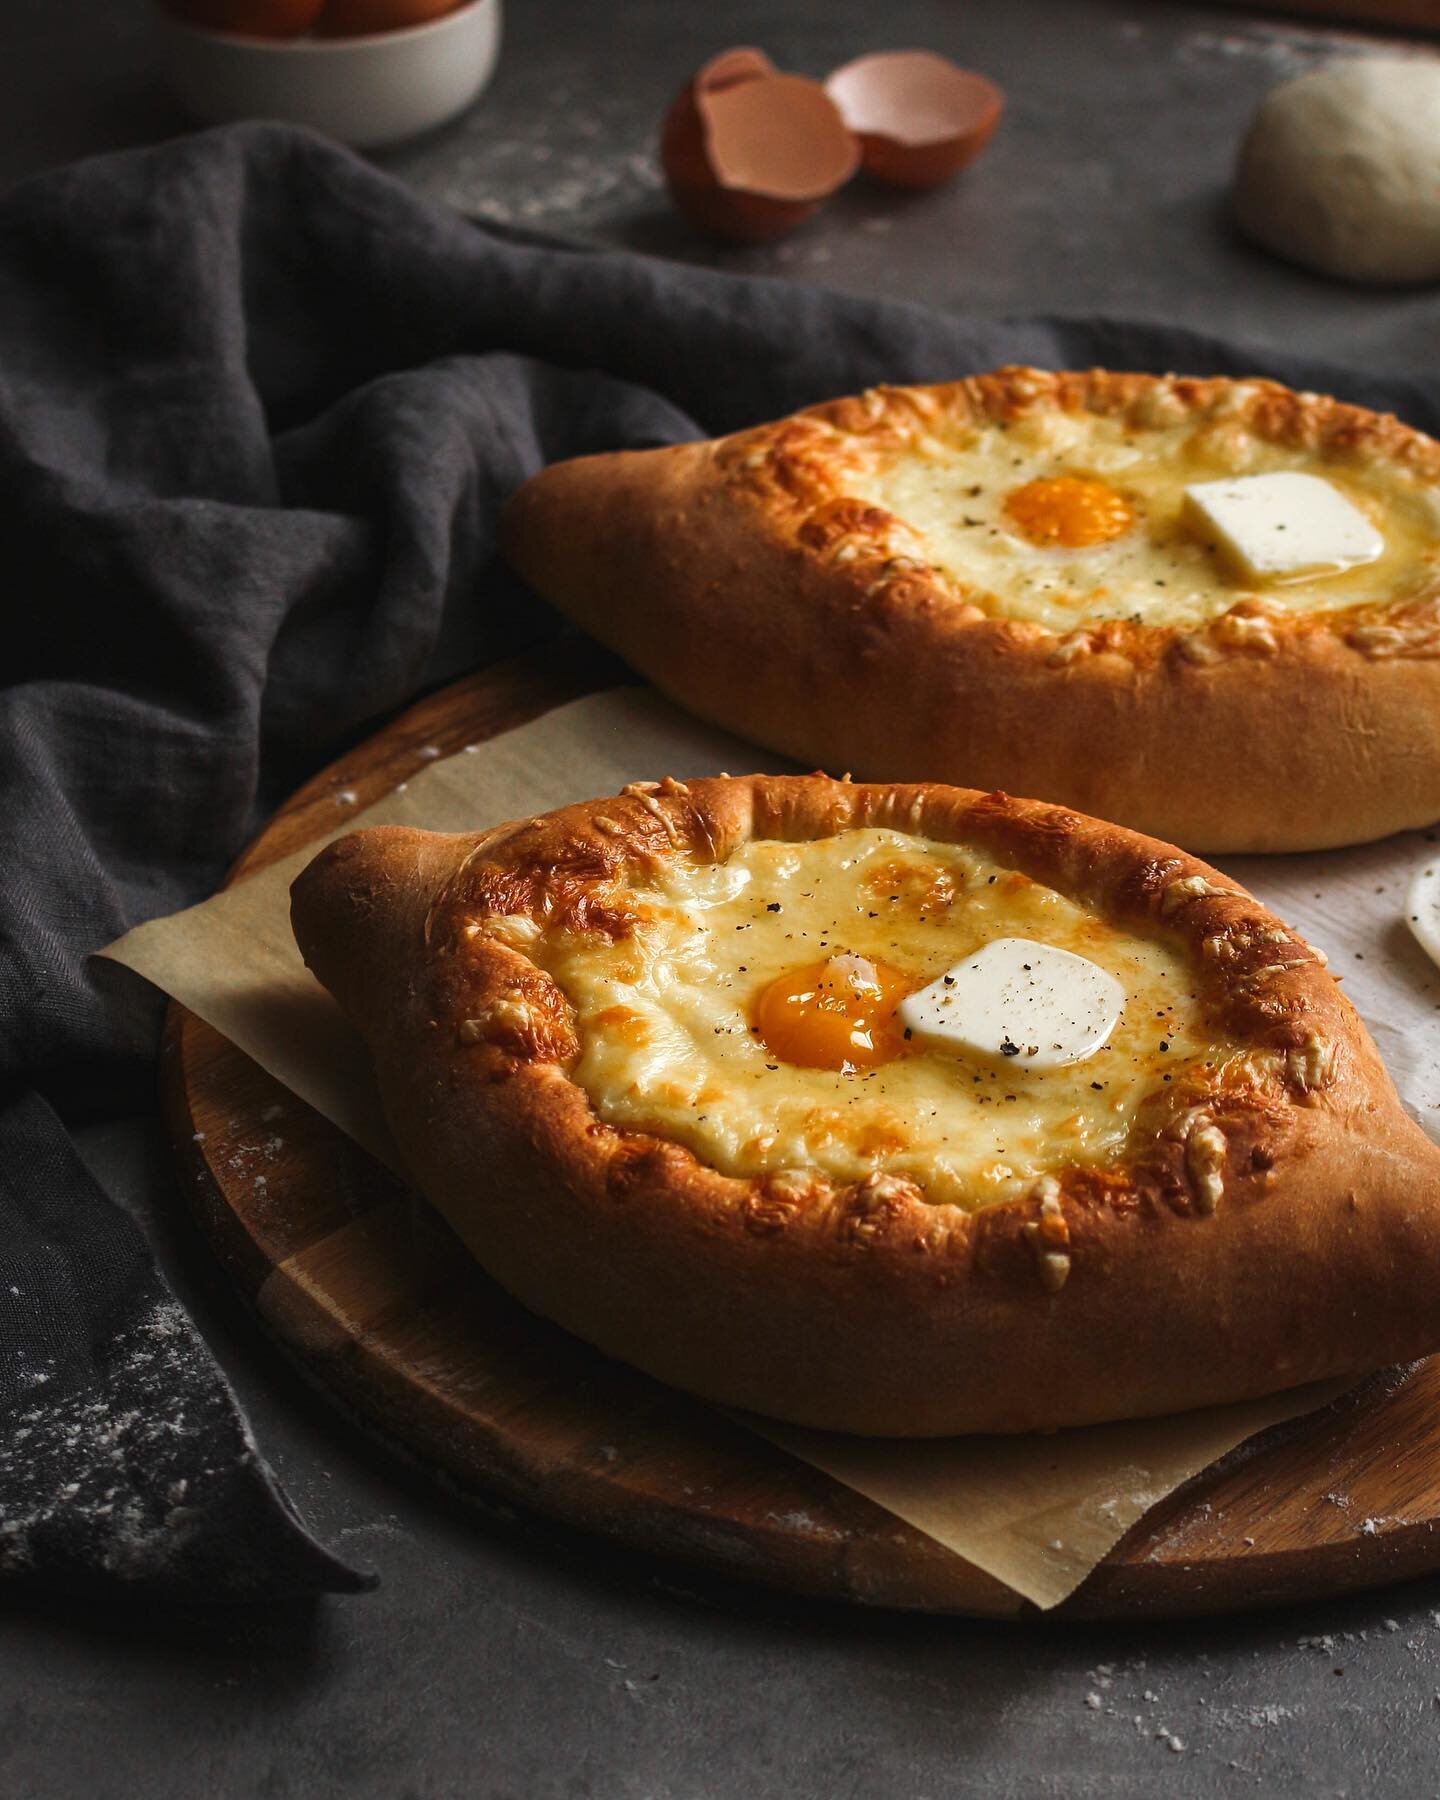 khachapuri~ i made a bunch today! needed lots and lots of cheese... the ones in the pic were a little too big for me, so i made some half sized ones and froze them for later :D

. 
. 
.

#khachapuri #adjariankhachapuri #feta #mozzarella #baking #bake